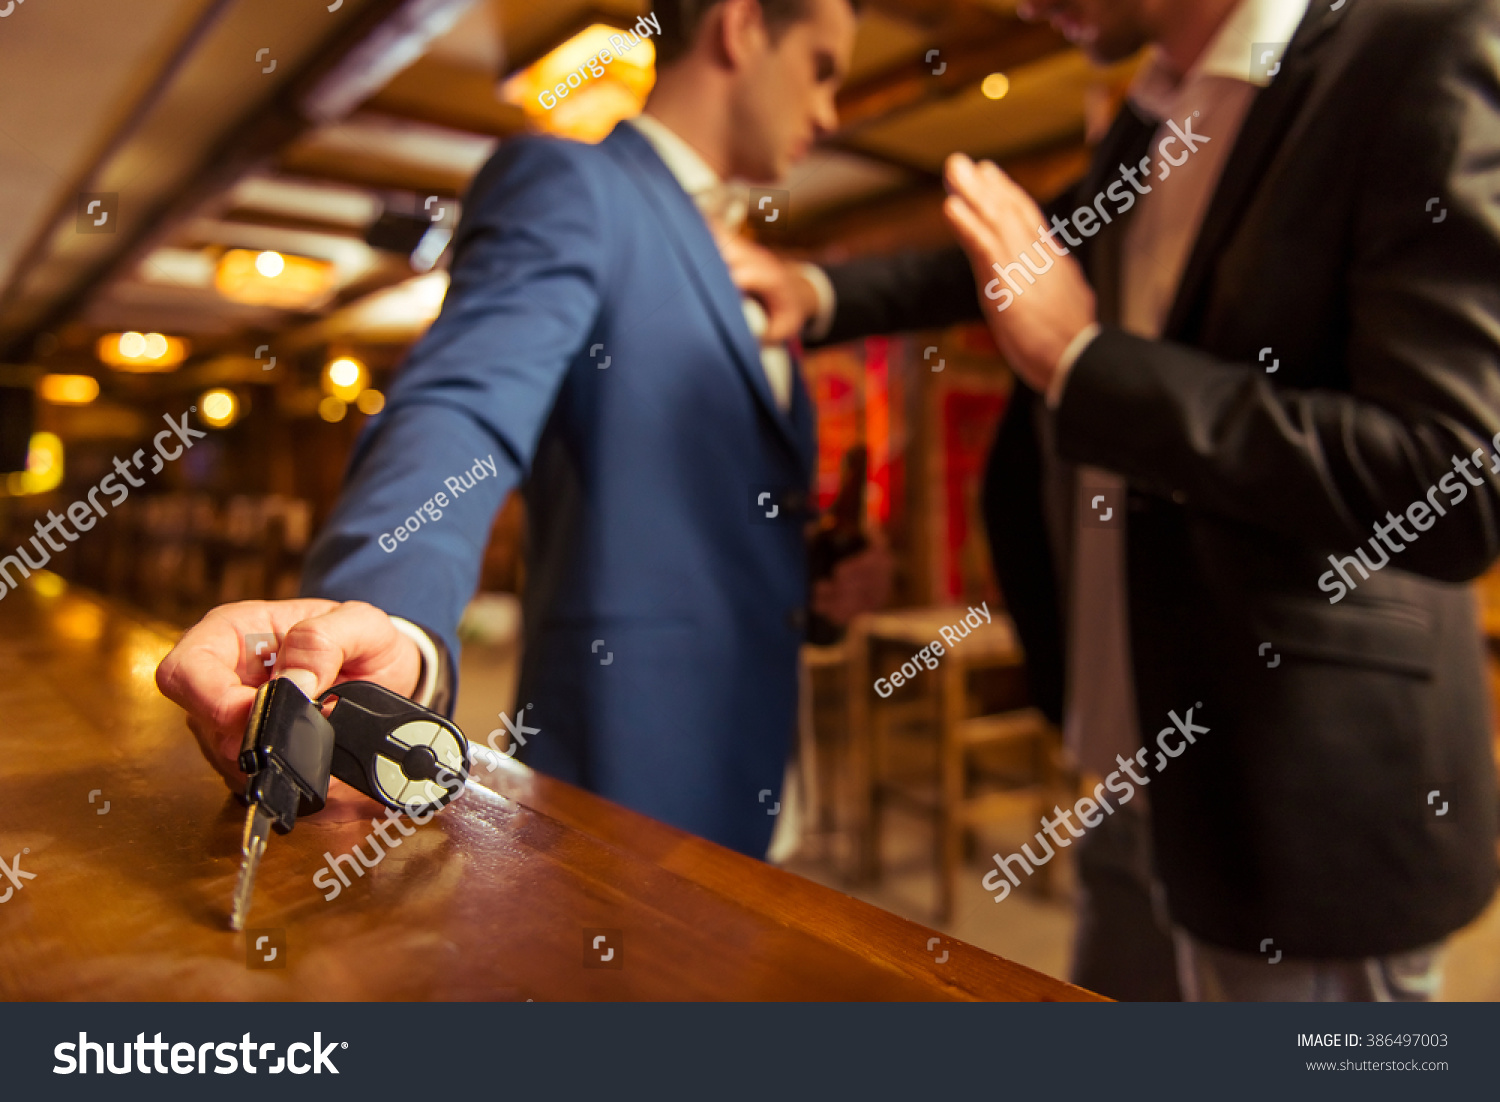 Young drunk businessman is holding a bottle of beer and reaching car keys on bar counter in pub, another man is stopping him #386497003